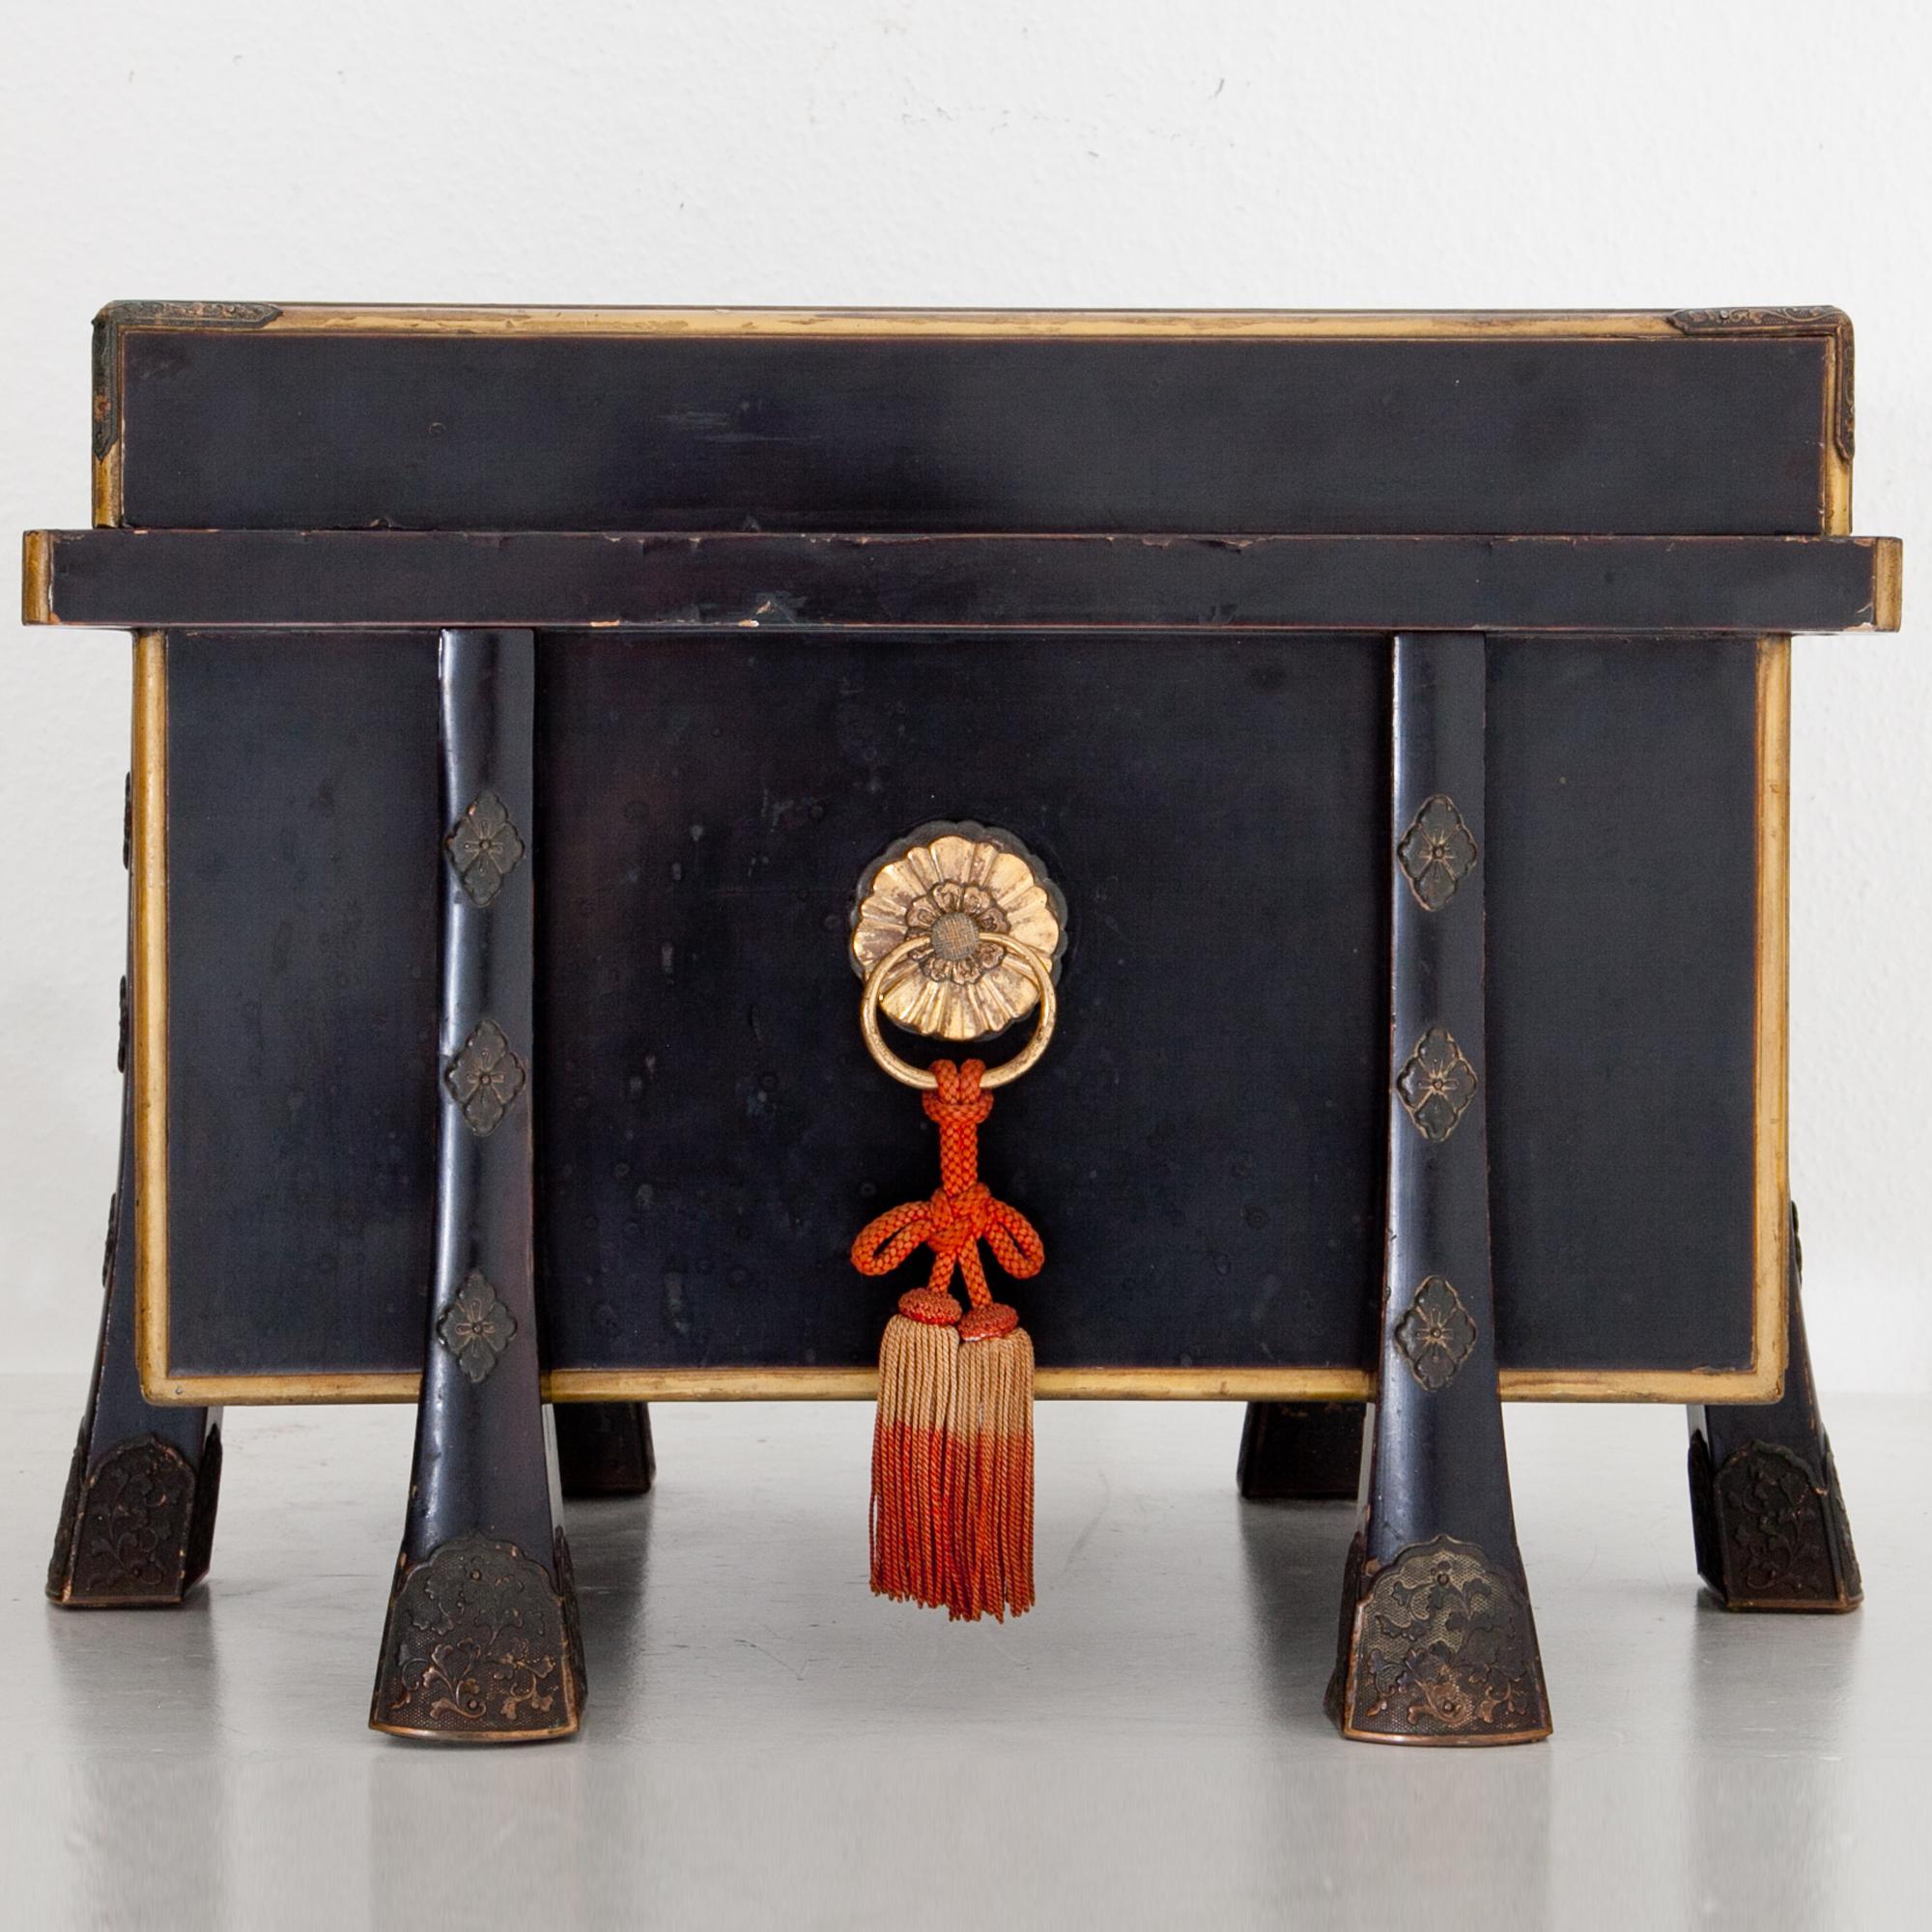 Black lacquered Japanese chest, the edges are accentuated with brass molding. The body rests on tapered legs. The lid is completely detachable. Minor losses and fading.